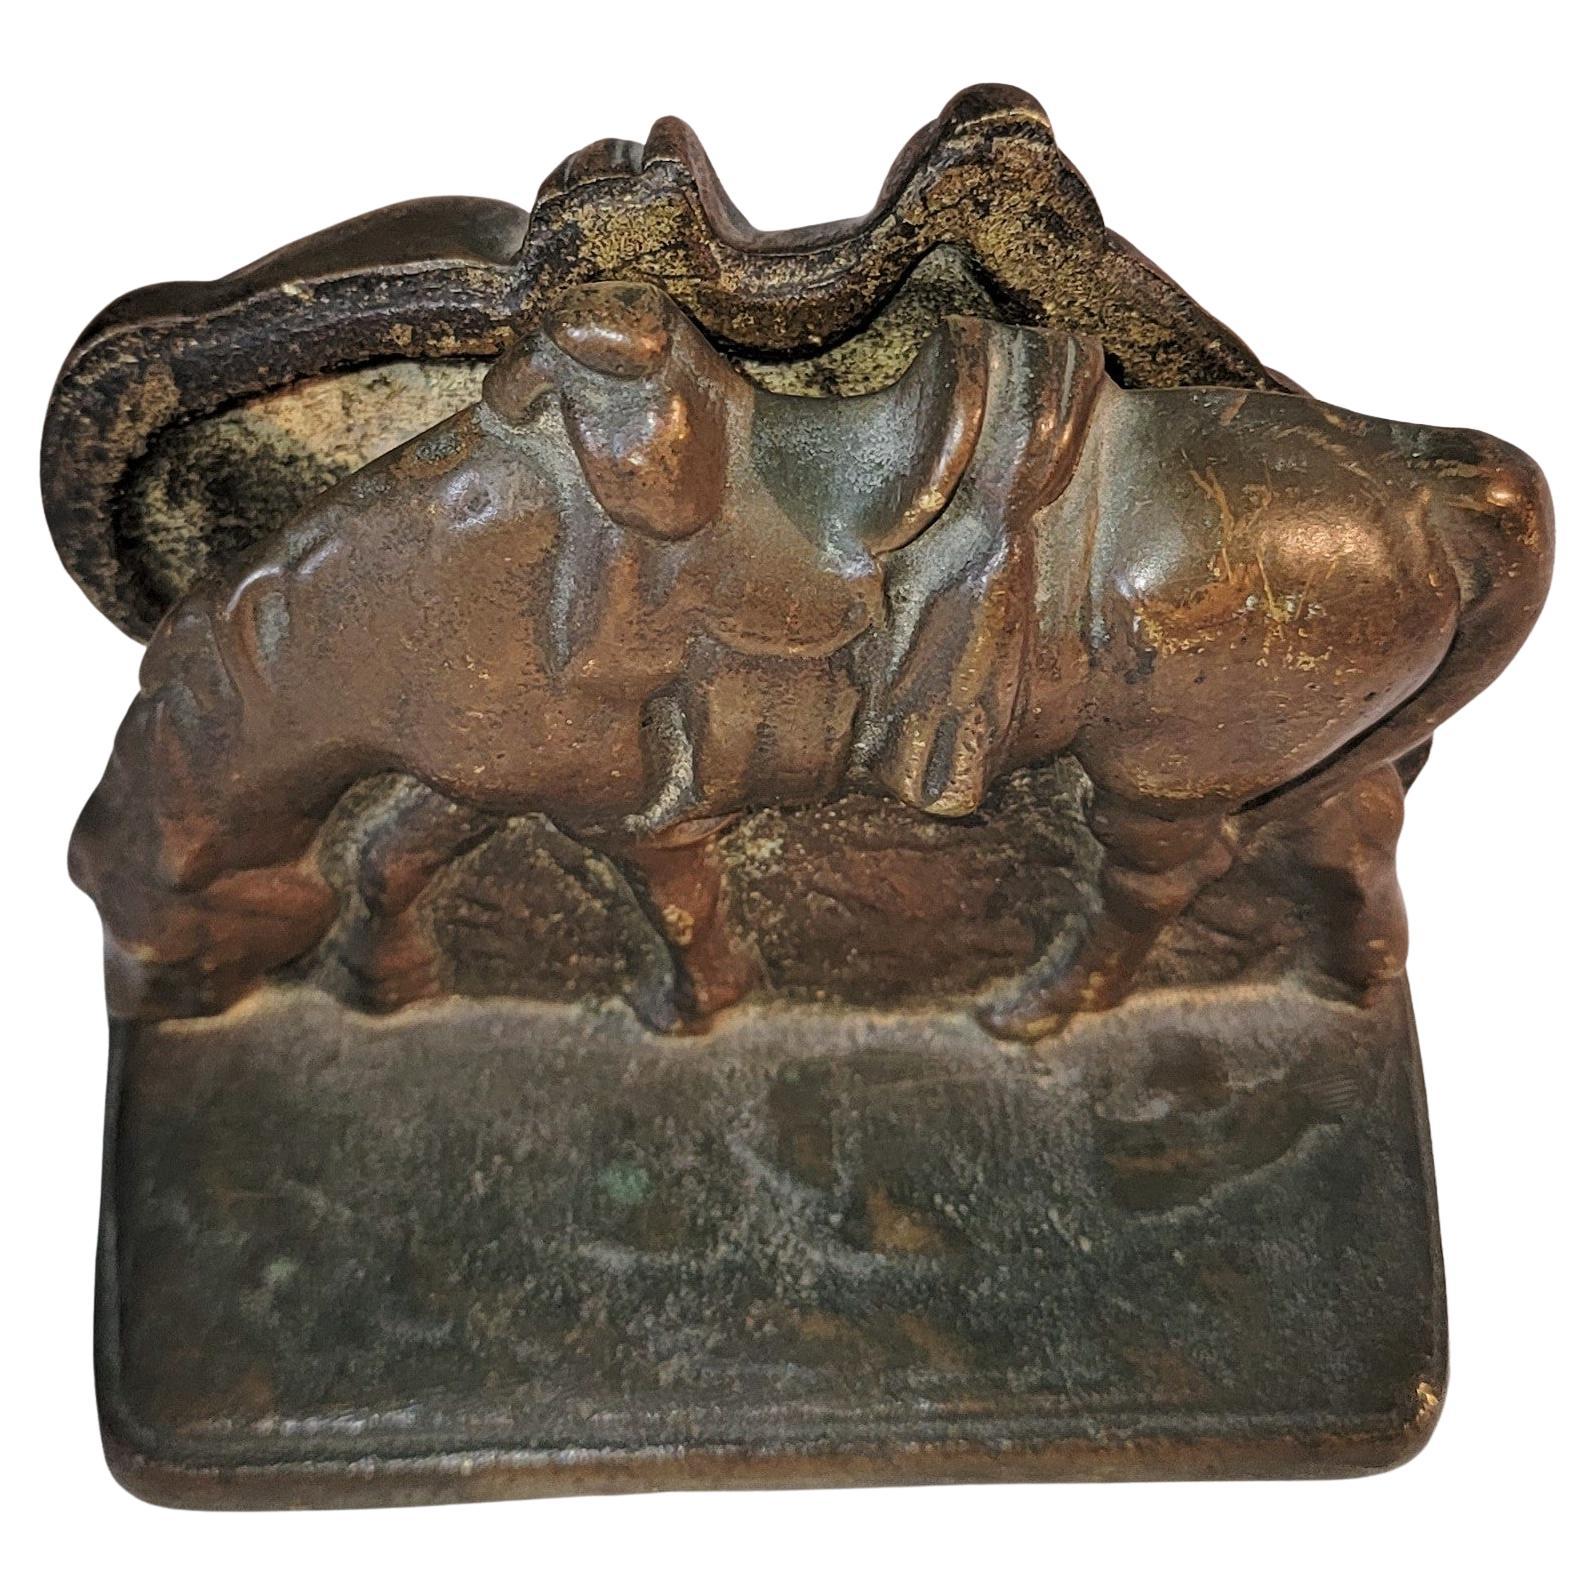 Pair 19th C bronze Horse bookends
 Measure 2 deep x 4.5 high x 5wide.